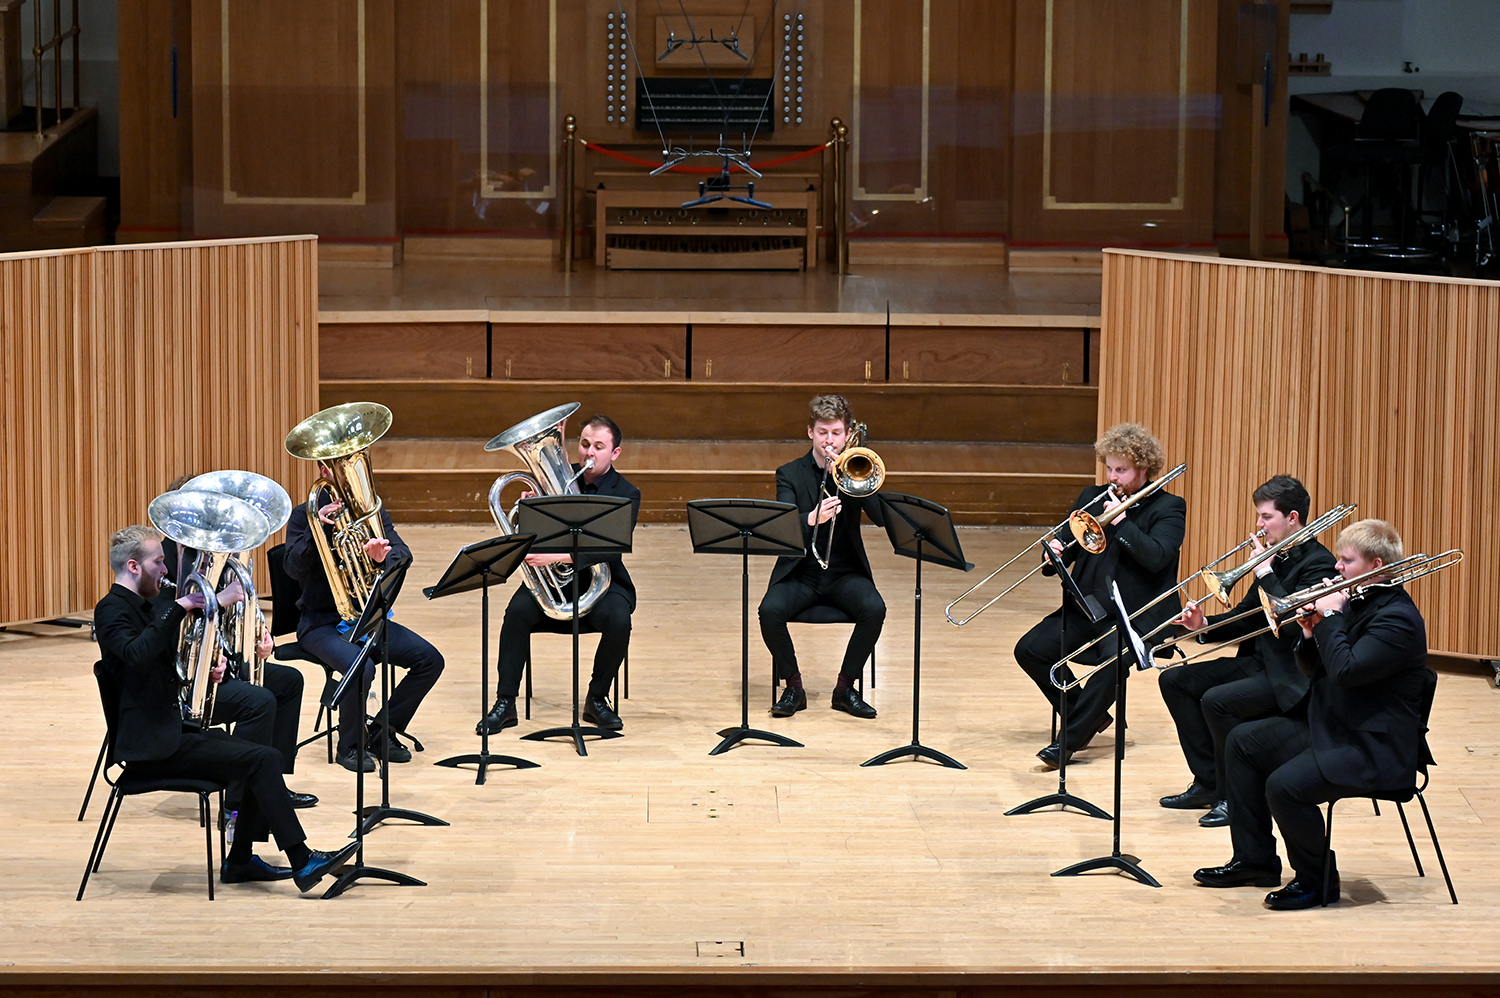 Brass musicians performing on the Amaryllis Fleming Concert Hall stage